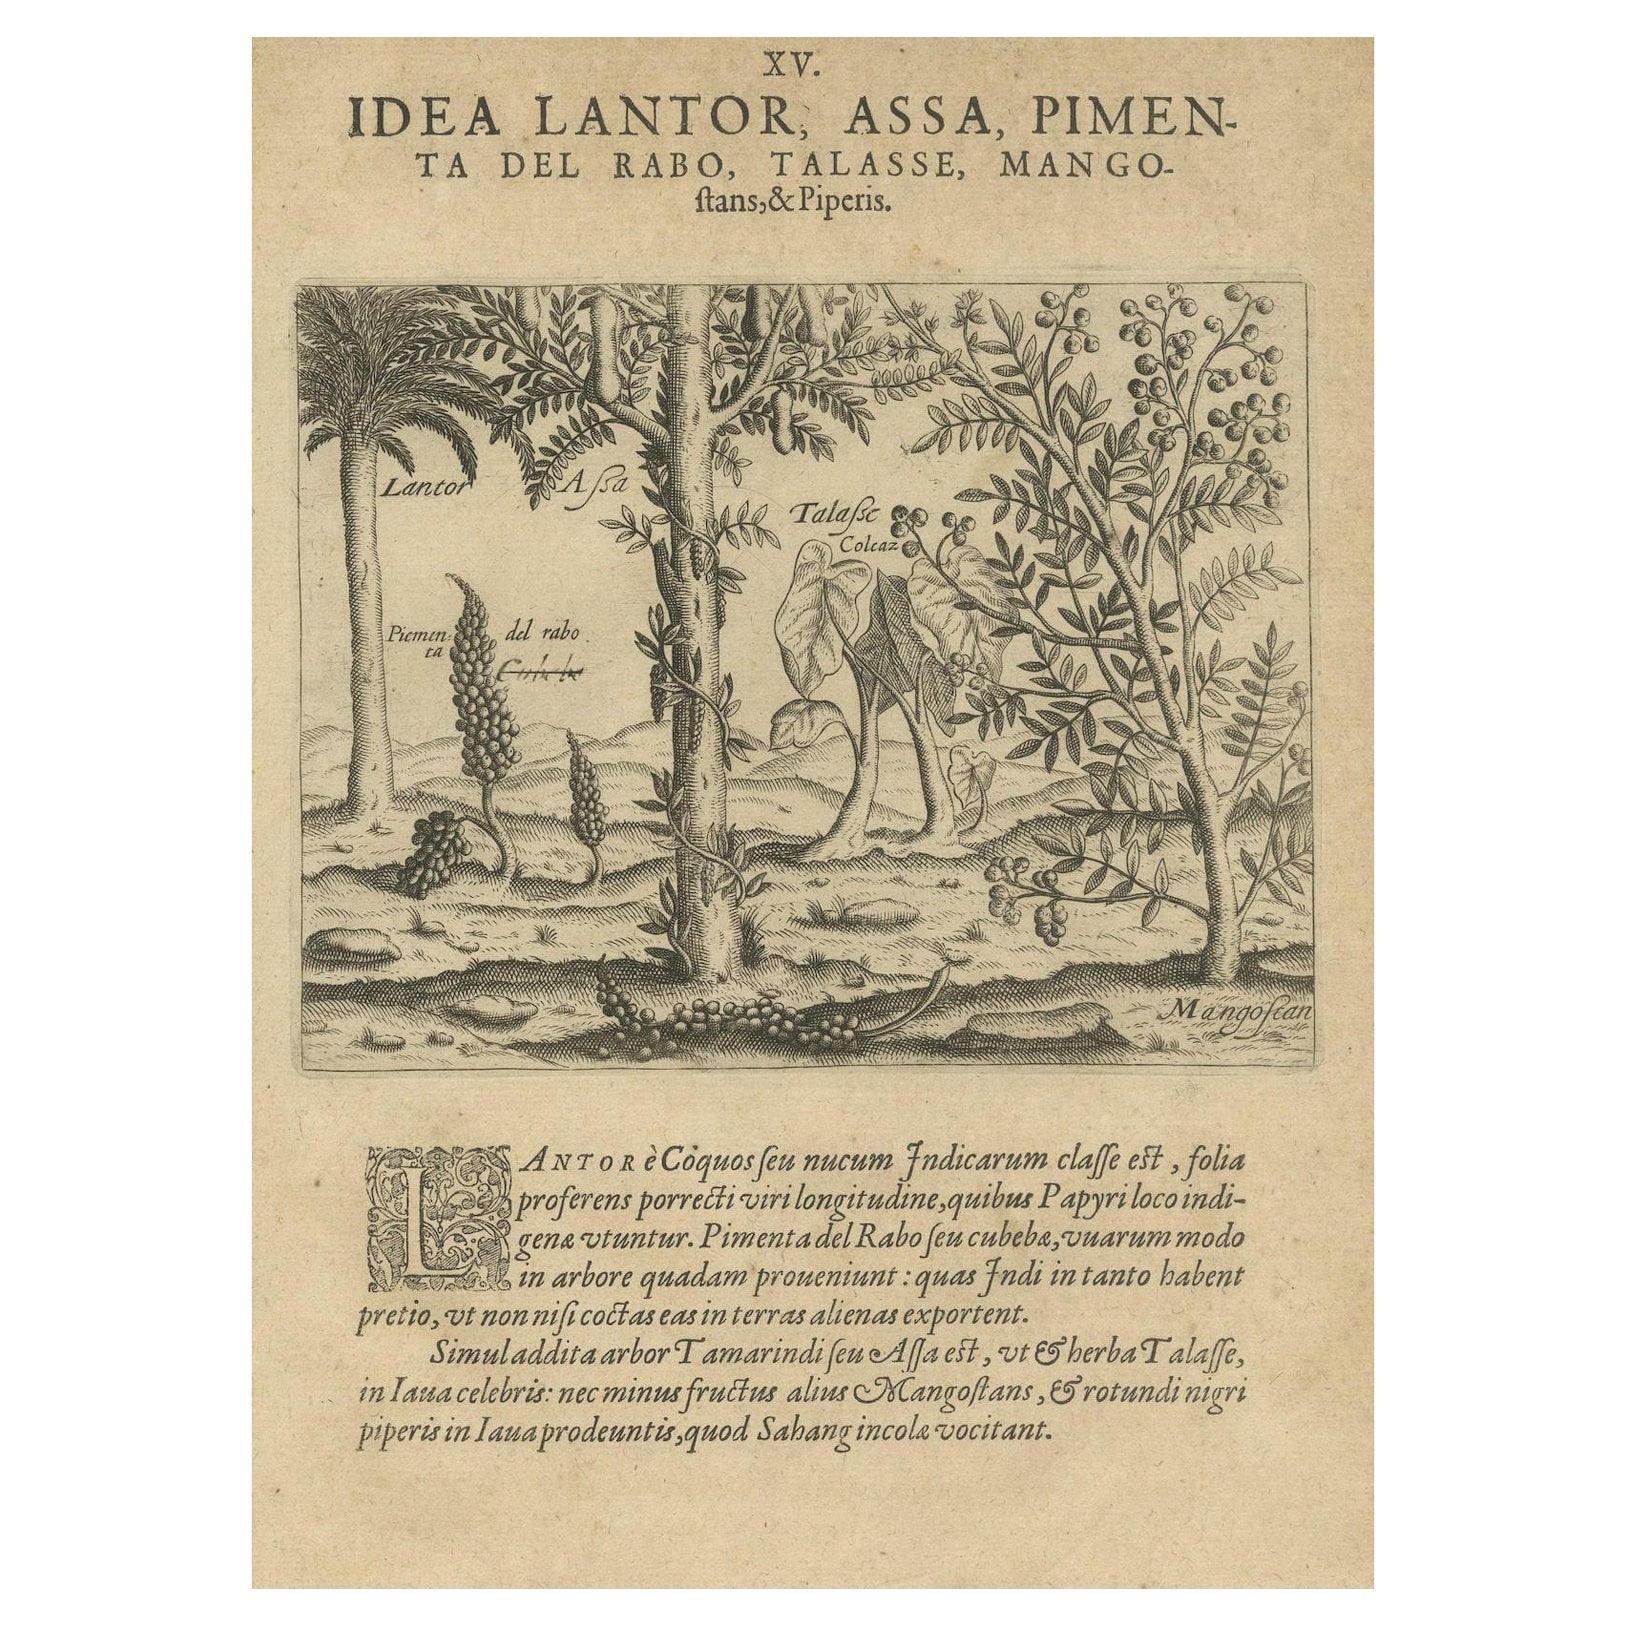 Verdant Wonders: Exotique Trees and Spices of India in De Bry's 1601 Illustration